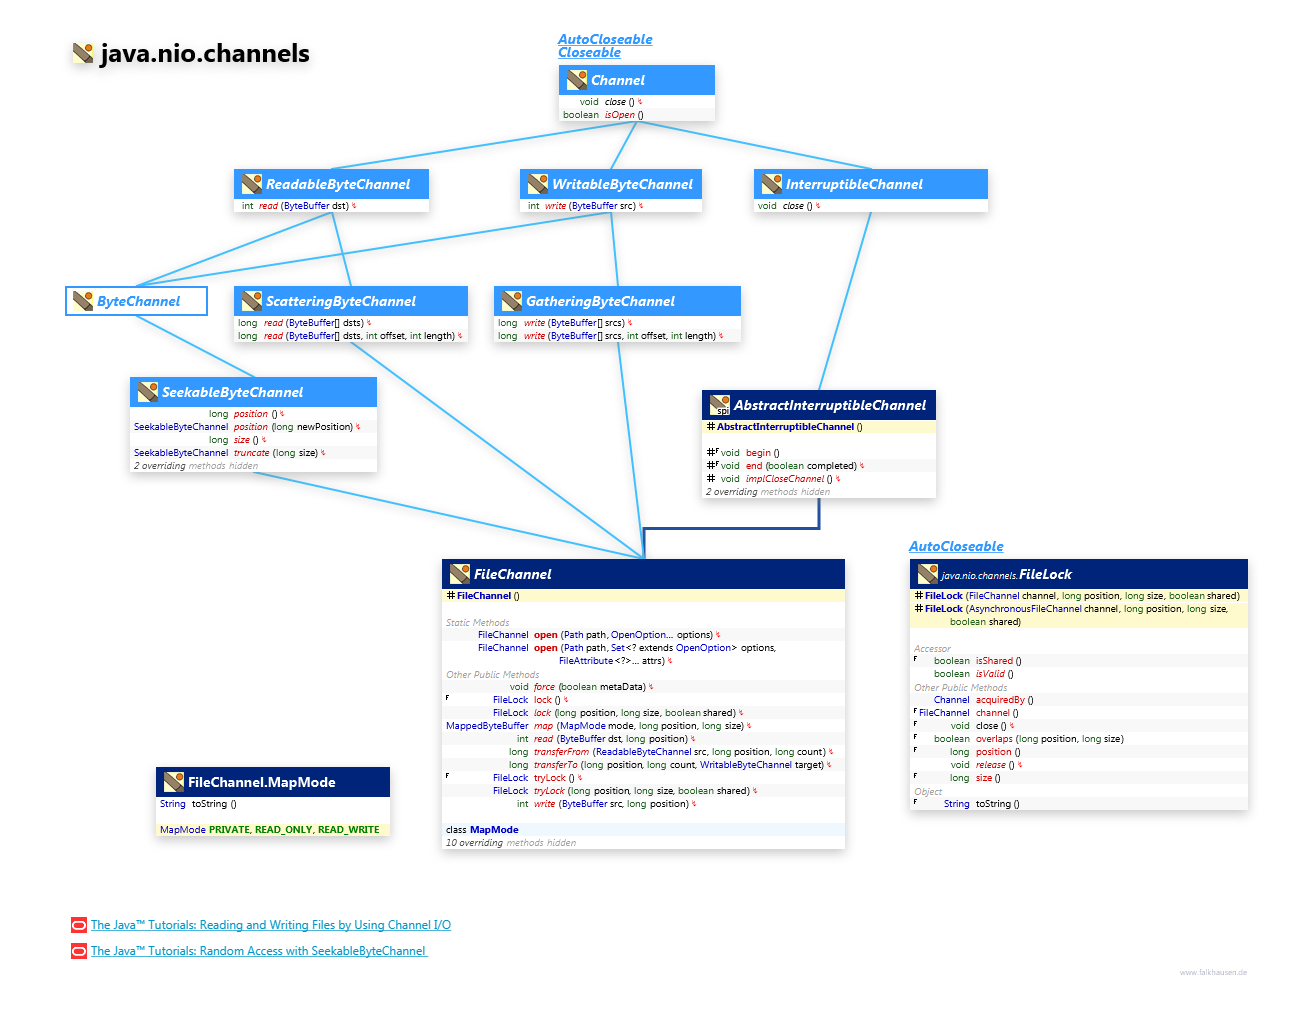 java.nio.channels FileChannel class diagram and api documentation for Java 8